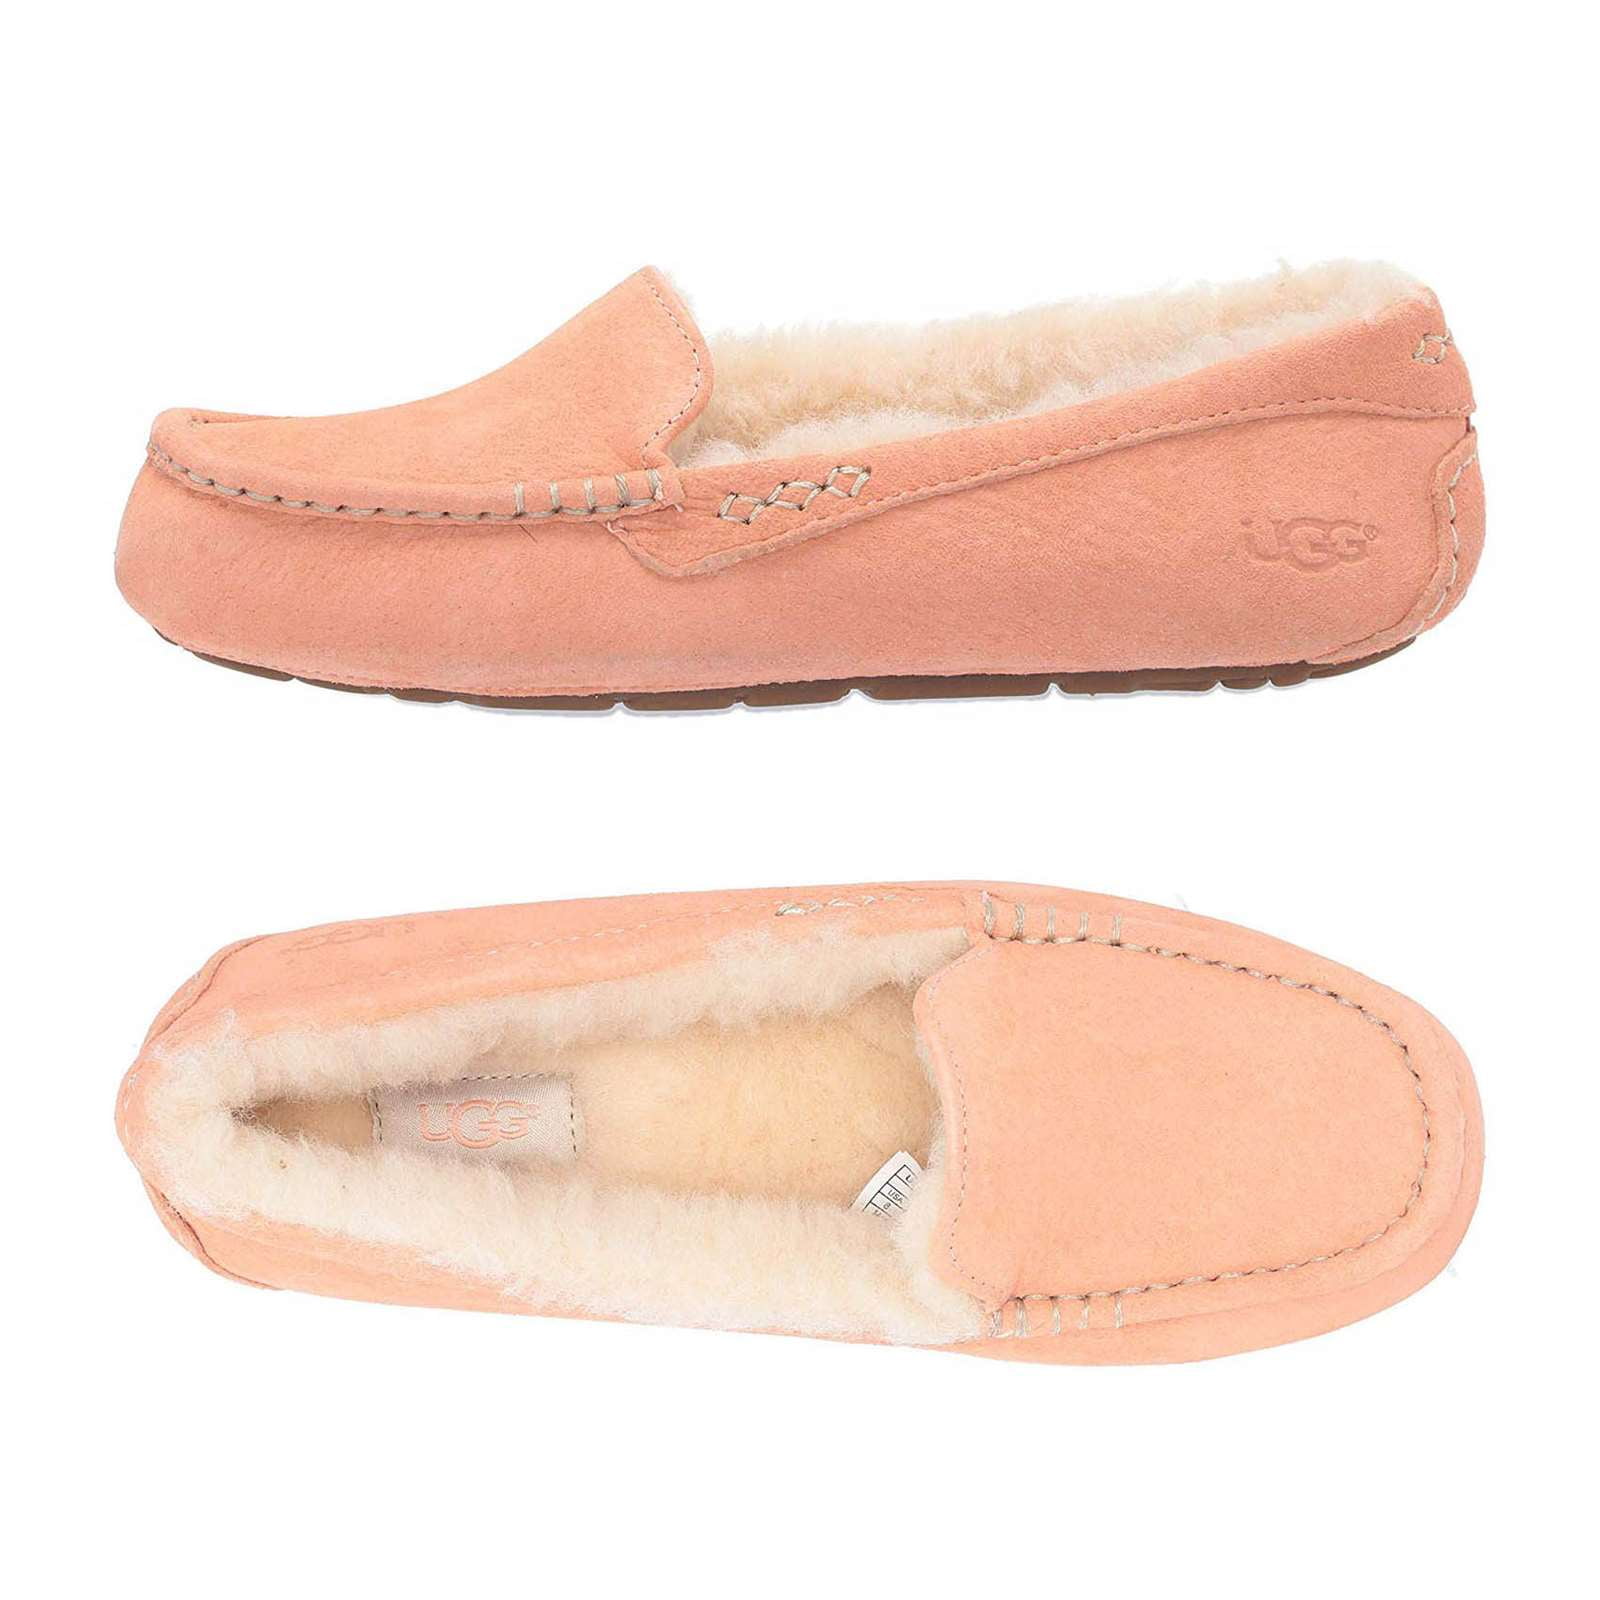 UGG Ansley Slippers Chocolate Size 8 | Uggs, Slippers, Ugg slippers